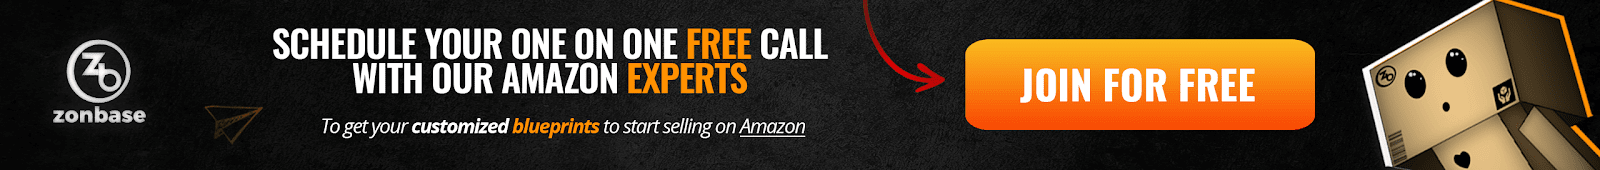 Get Free Call with our Amazon Experts